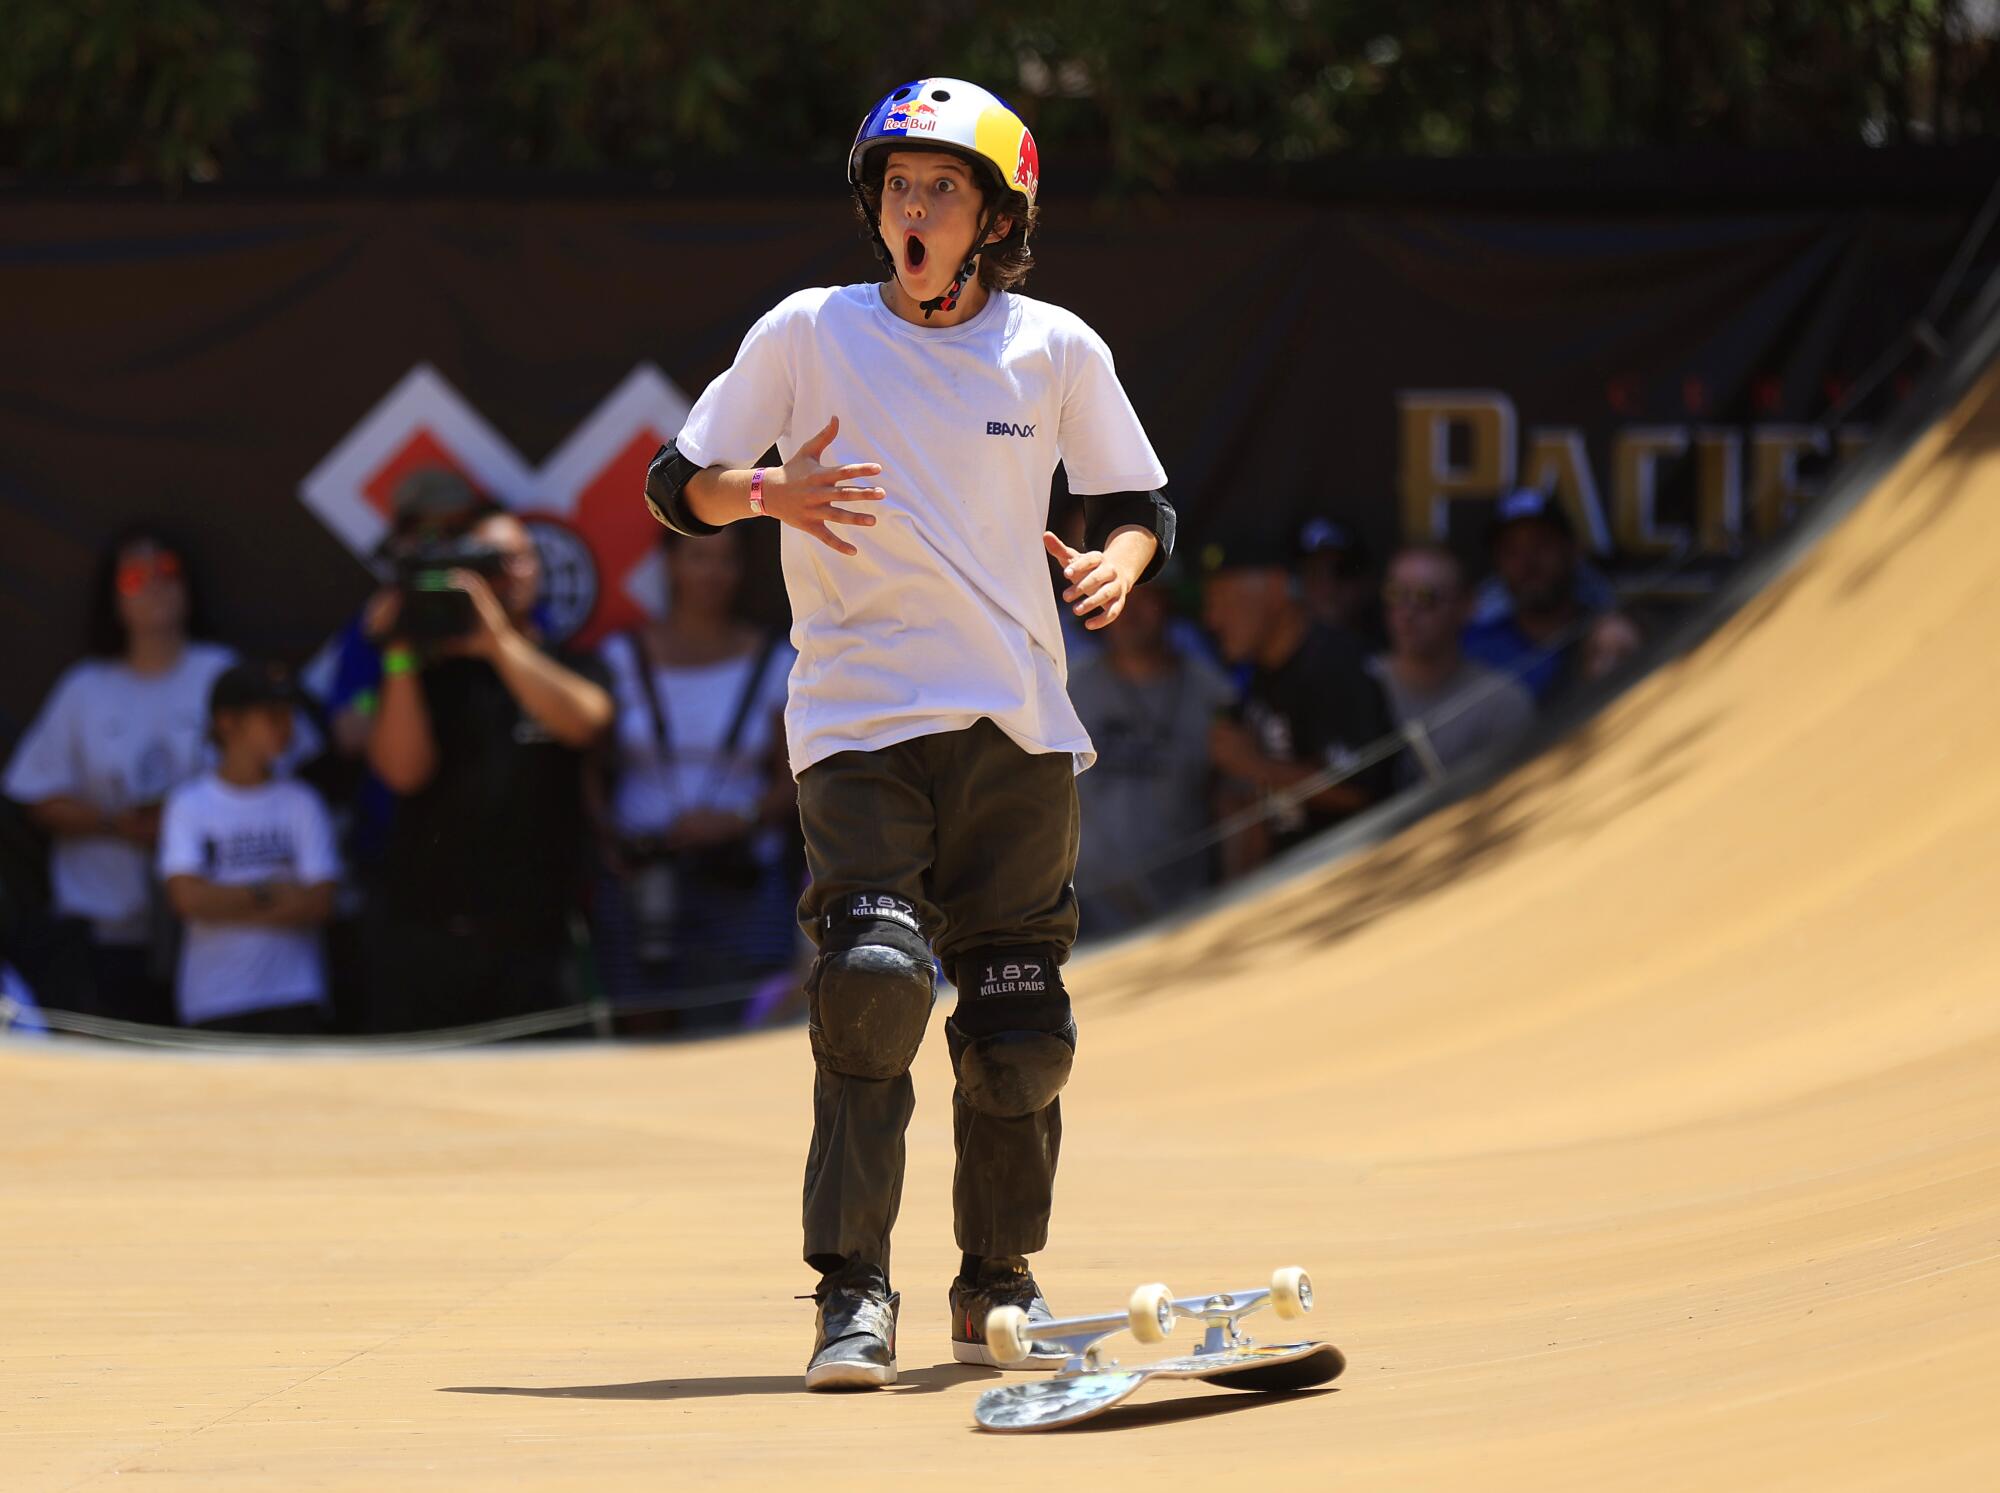 Gui Khury reacts after falling on a trick during the skateboard vert trick competition in the X Games.